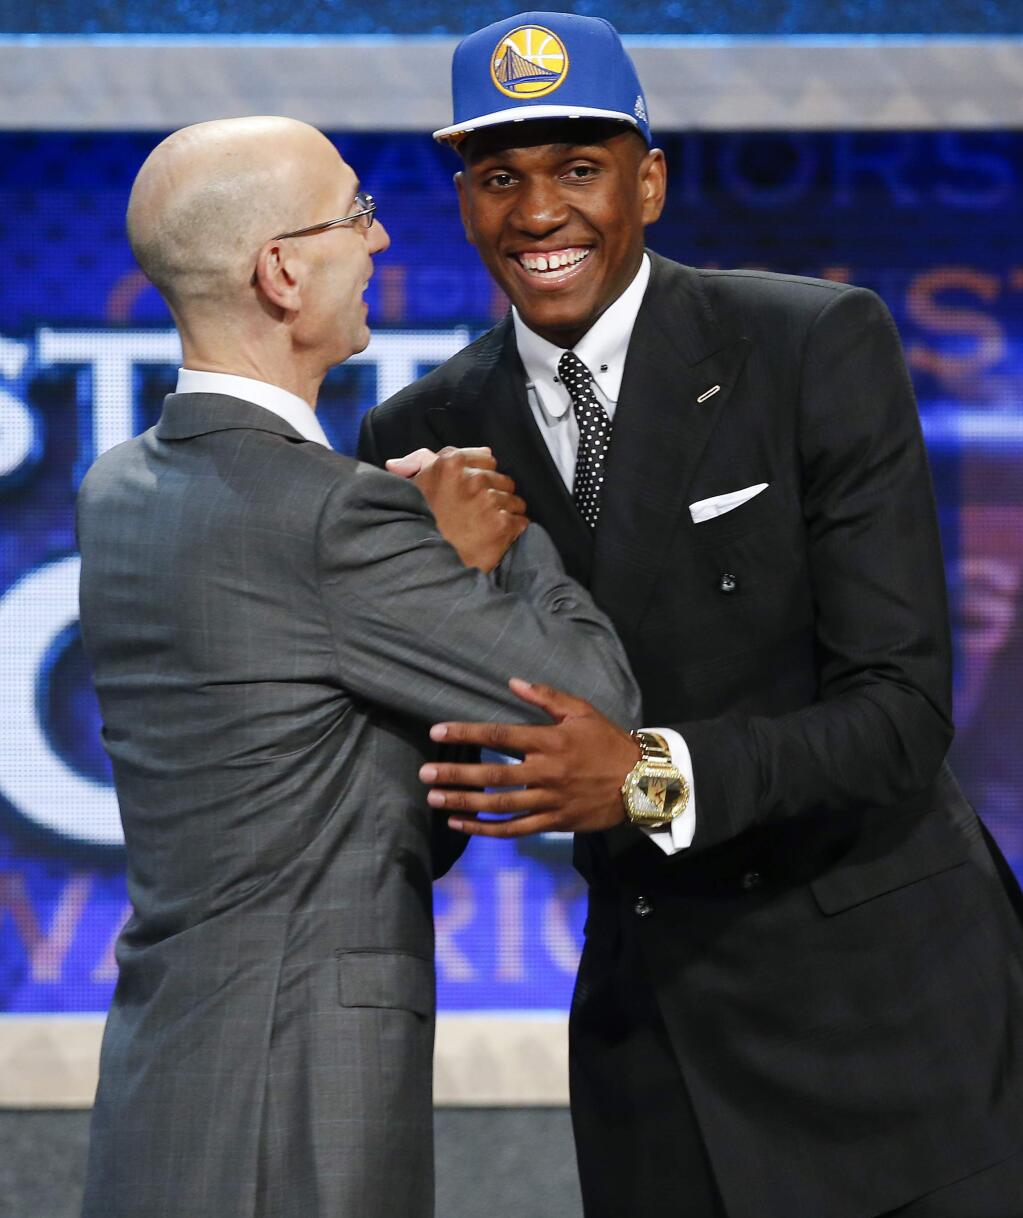 Kevon Looney, right, greets NBA Commissioner Adam Silver after being selected 30th overall by the Golden State Warriors during the NBA draft, Thursday, June 25, 2015, in New York. (AP Photo/Kathy Willens)